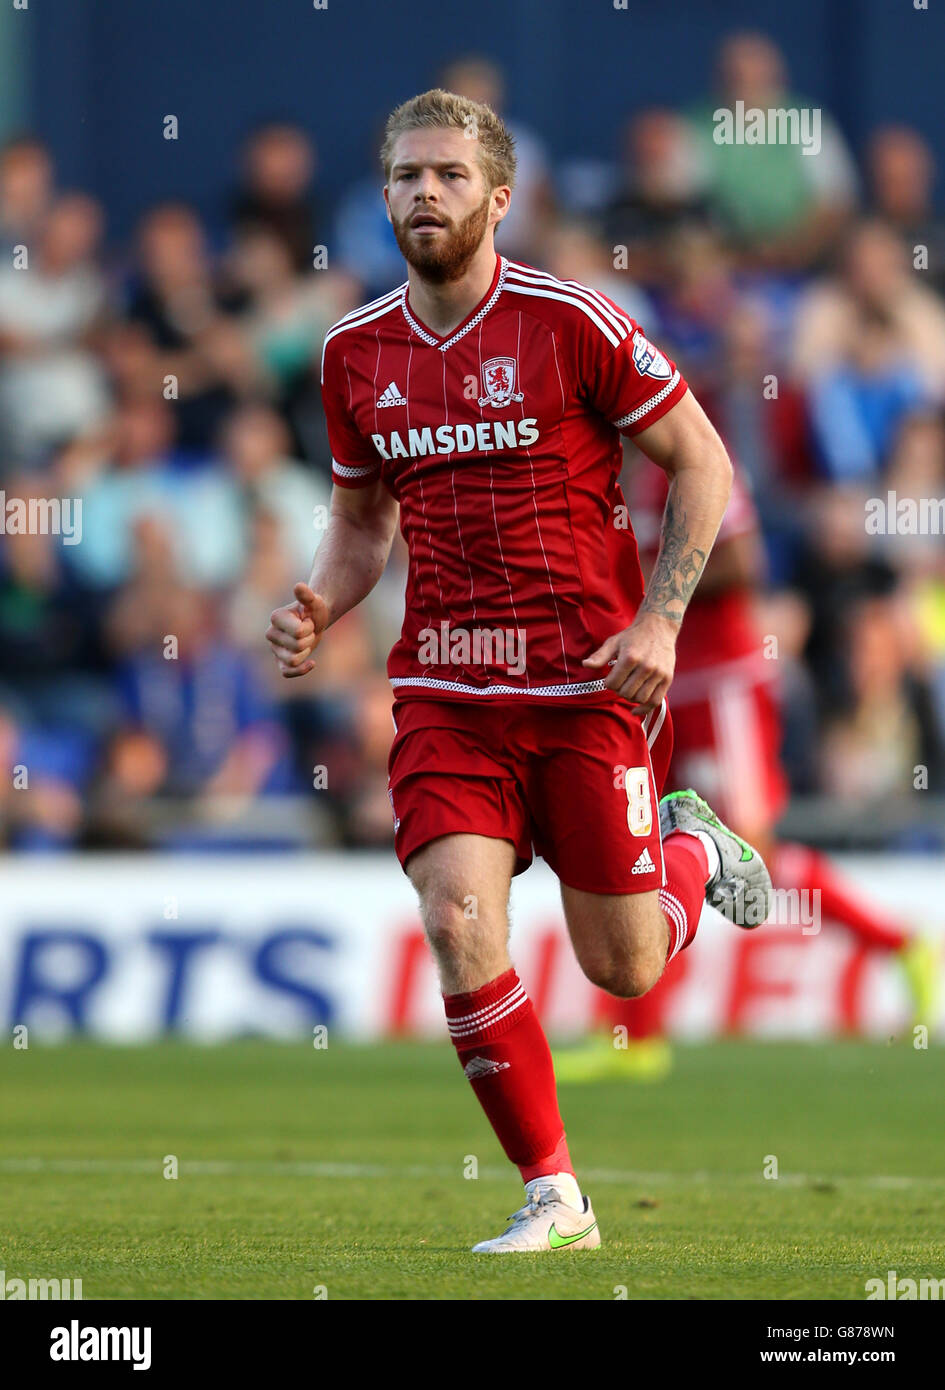 Middlesbrough's Adam Clayton during the Capital One Cup, First Round match at Boundary Park, Oldham. PRESS ASSOCIATION Photo. Picture date: Wednesday August 12, 2015. See PA story SOCCER Oldham. Photo credit should read: Simon Cooper/PA Wire. No use with unauthorised audio, video, data, fixture lists, club/league logos or 'live' services. Online in-match use limited to 45 images, no video emulation. No use in betting, games or single club/league/player publications. Stock Photo